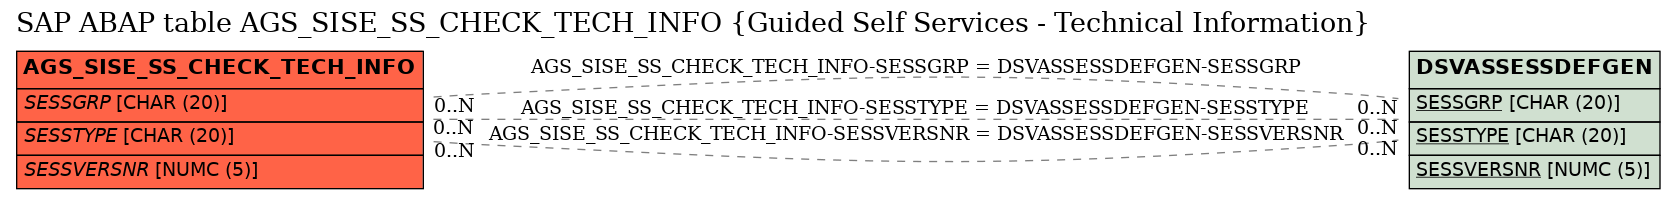 E-R Diagram for table AGS_SISE_SS_CHECK_TECH_INFO (Guided Self Services - Technical Information)